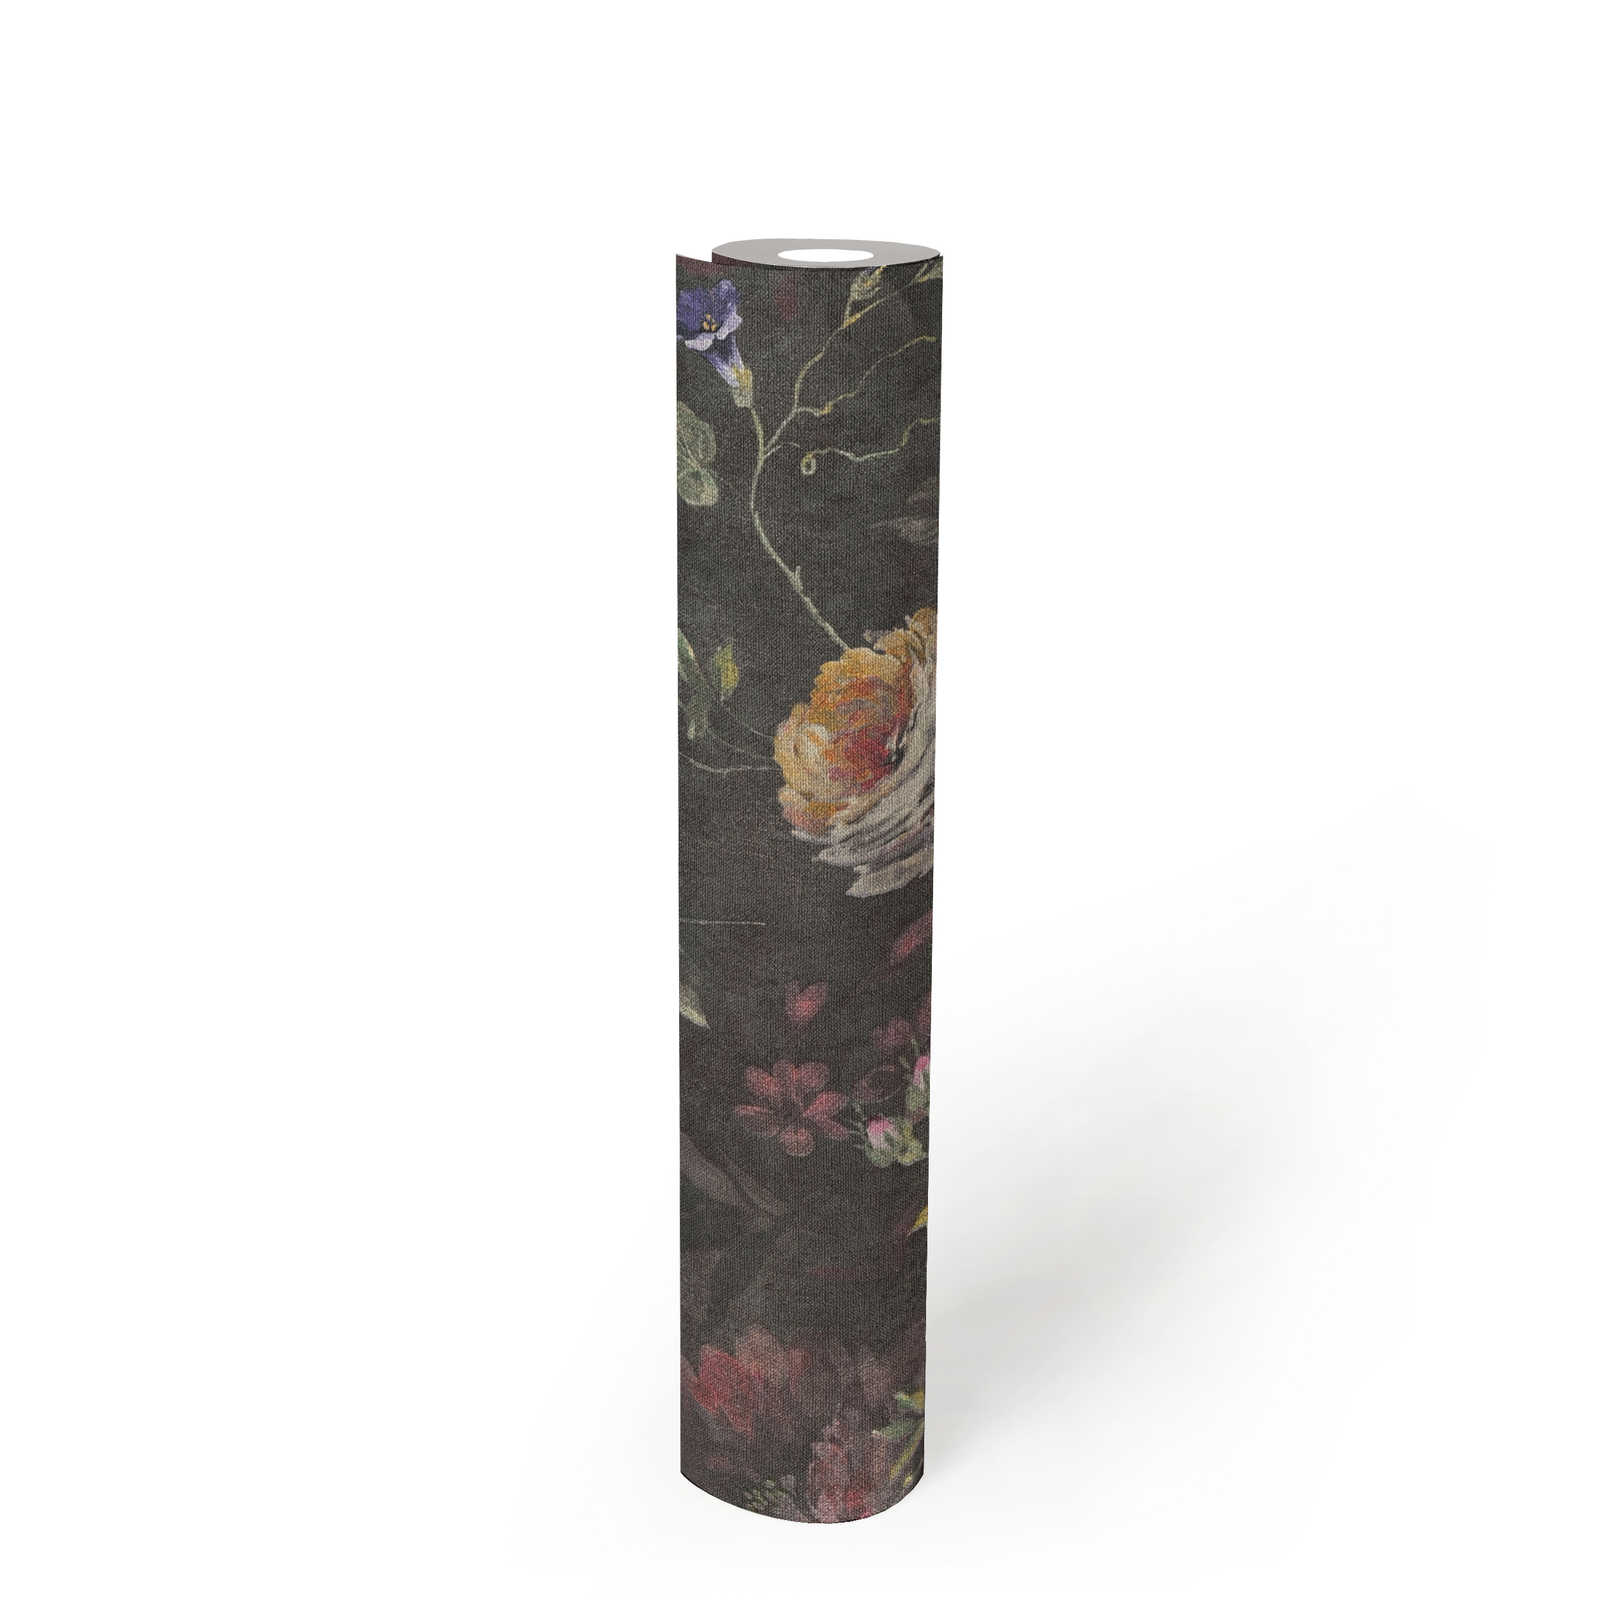             Floral non-woven wallpaper with floral pattern PVC-free - black, coloured, green
        